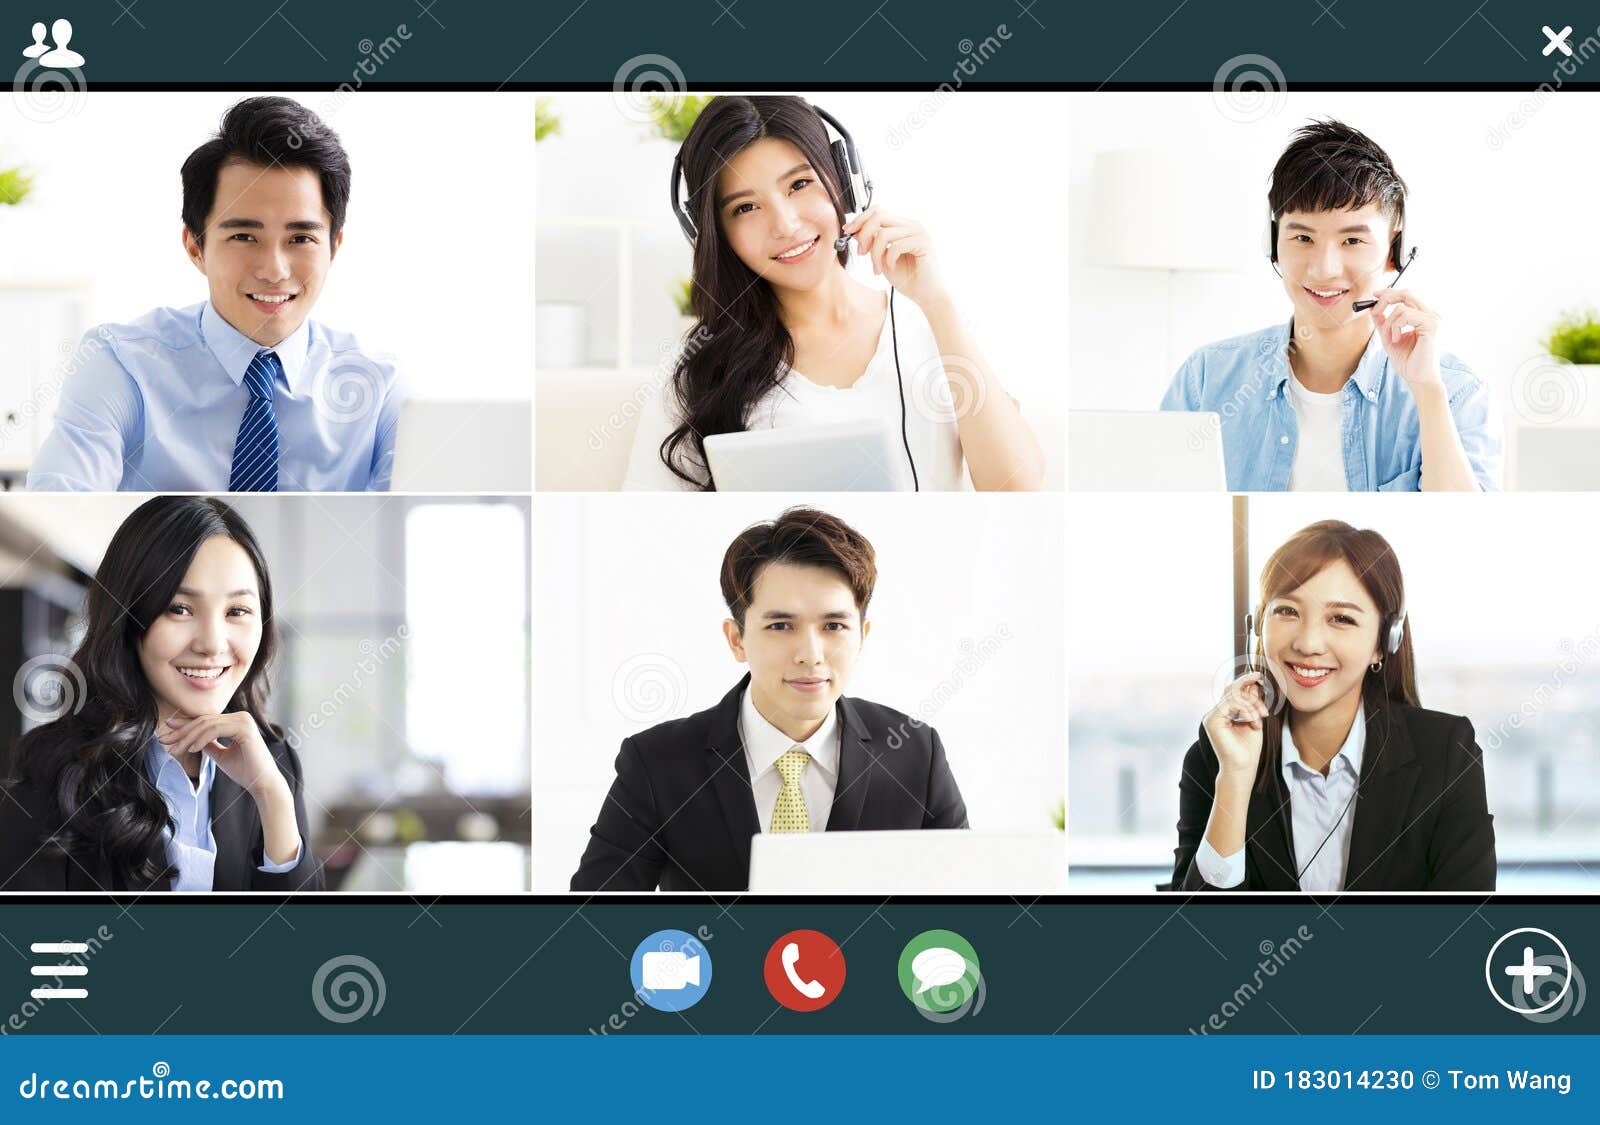 screenshot of  smiling business group online brainstorm on video conference